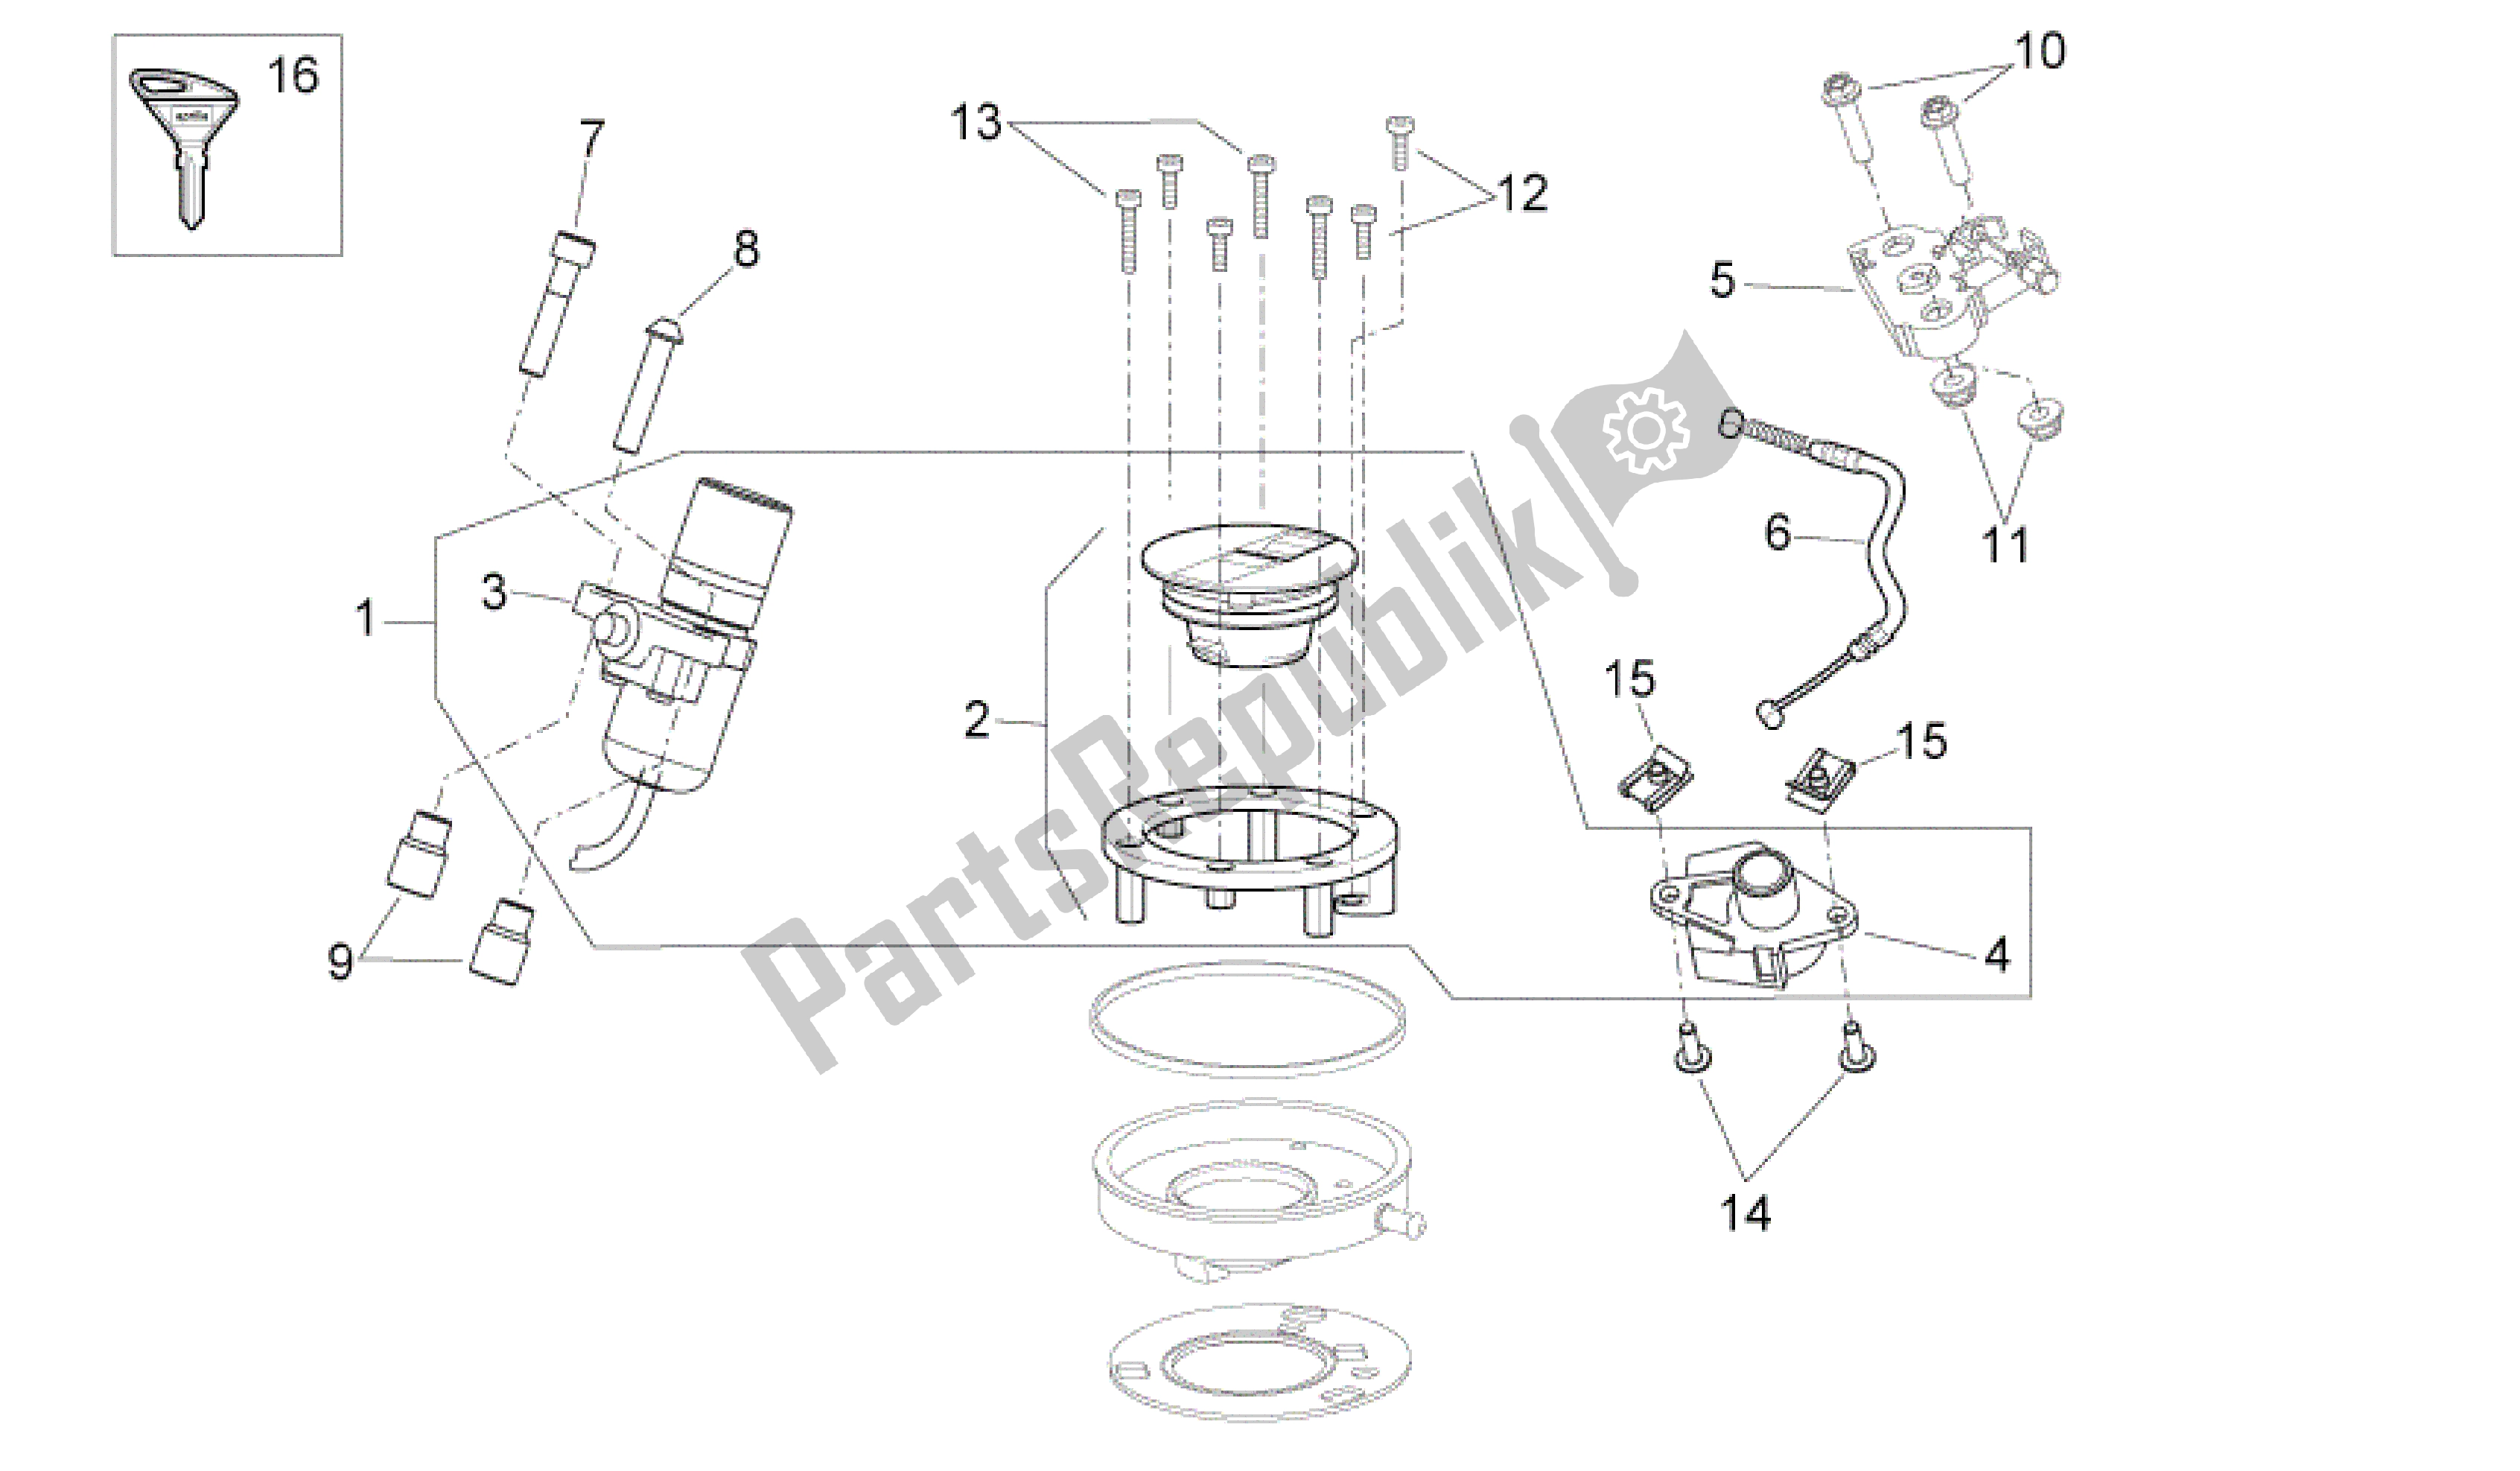 All parts for the Lock Hardware Kit of the Aprilia Shiver 750 2011 - 2013